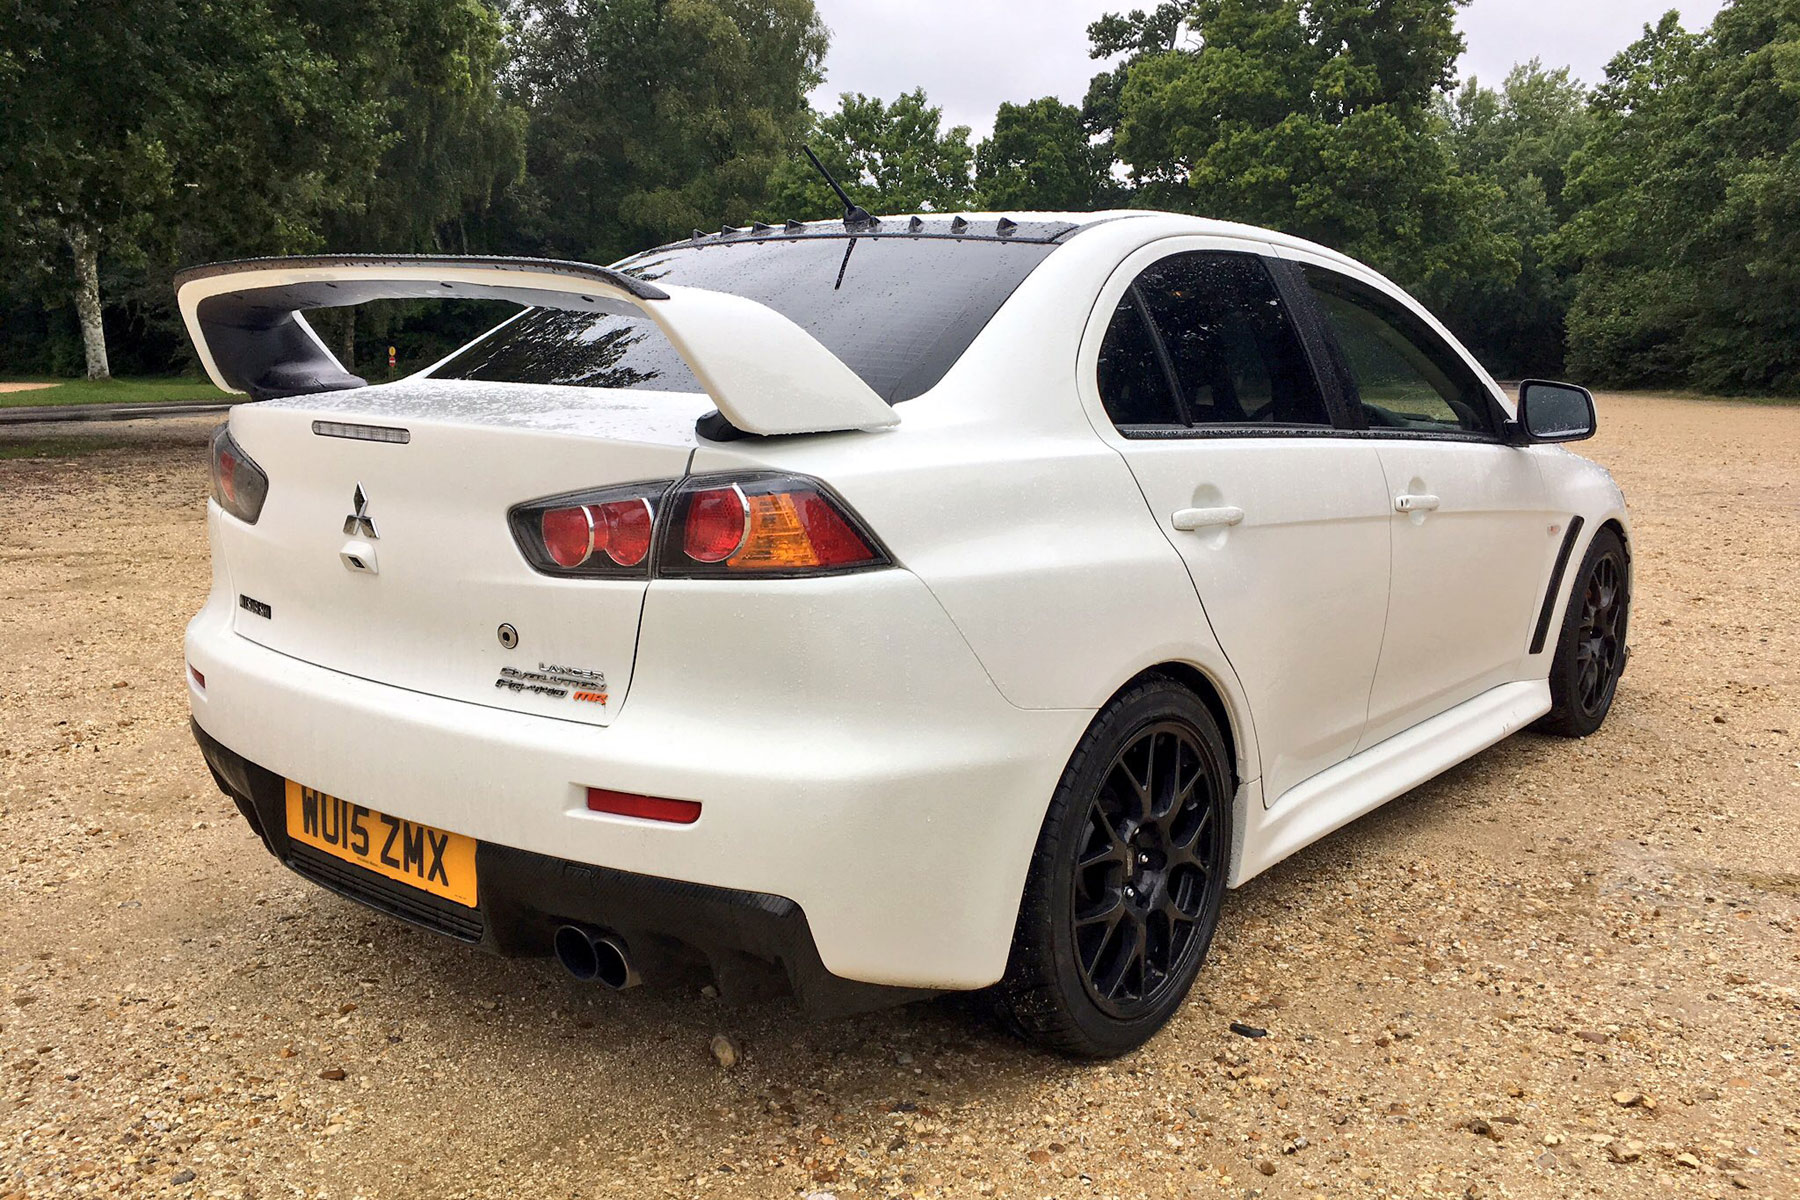 Fast and furious: driving the ultimate Mitsubishi Evo